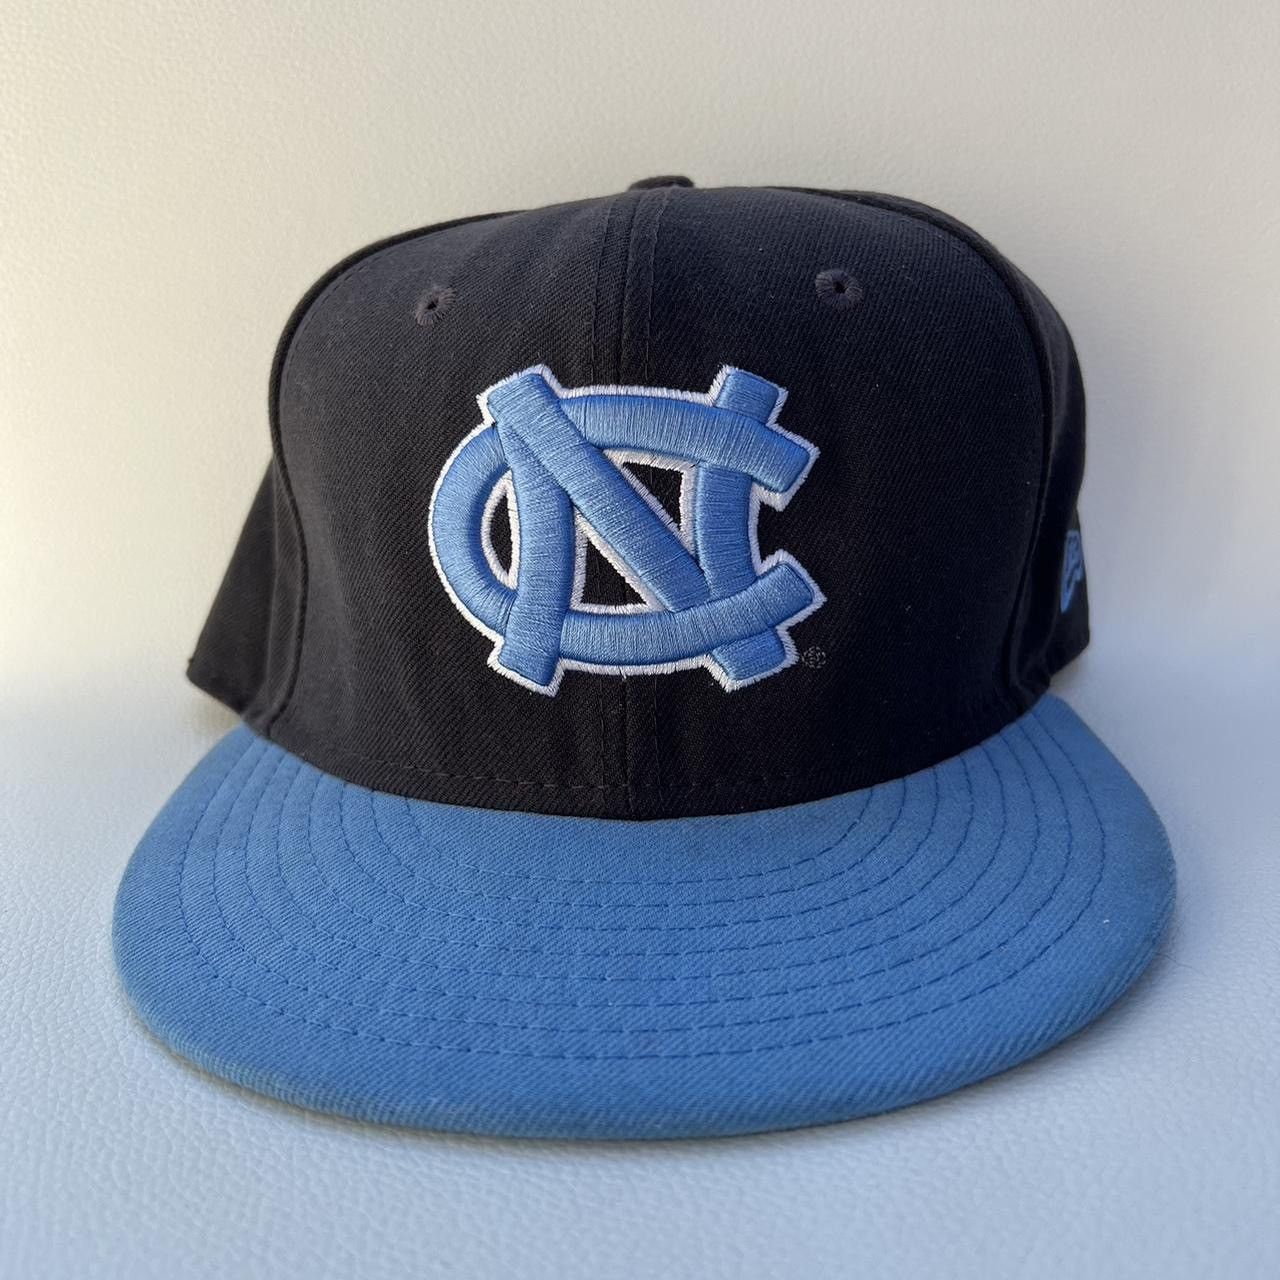 New Era Y2K New Era UNC Fitted Hat | Grailed